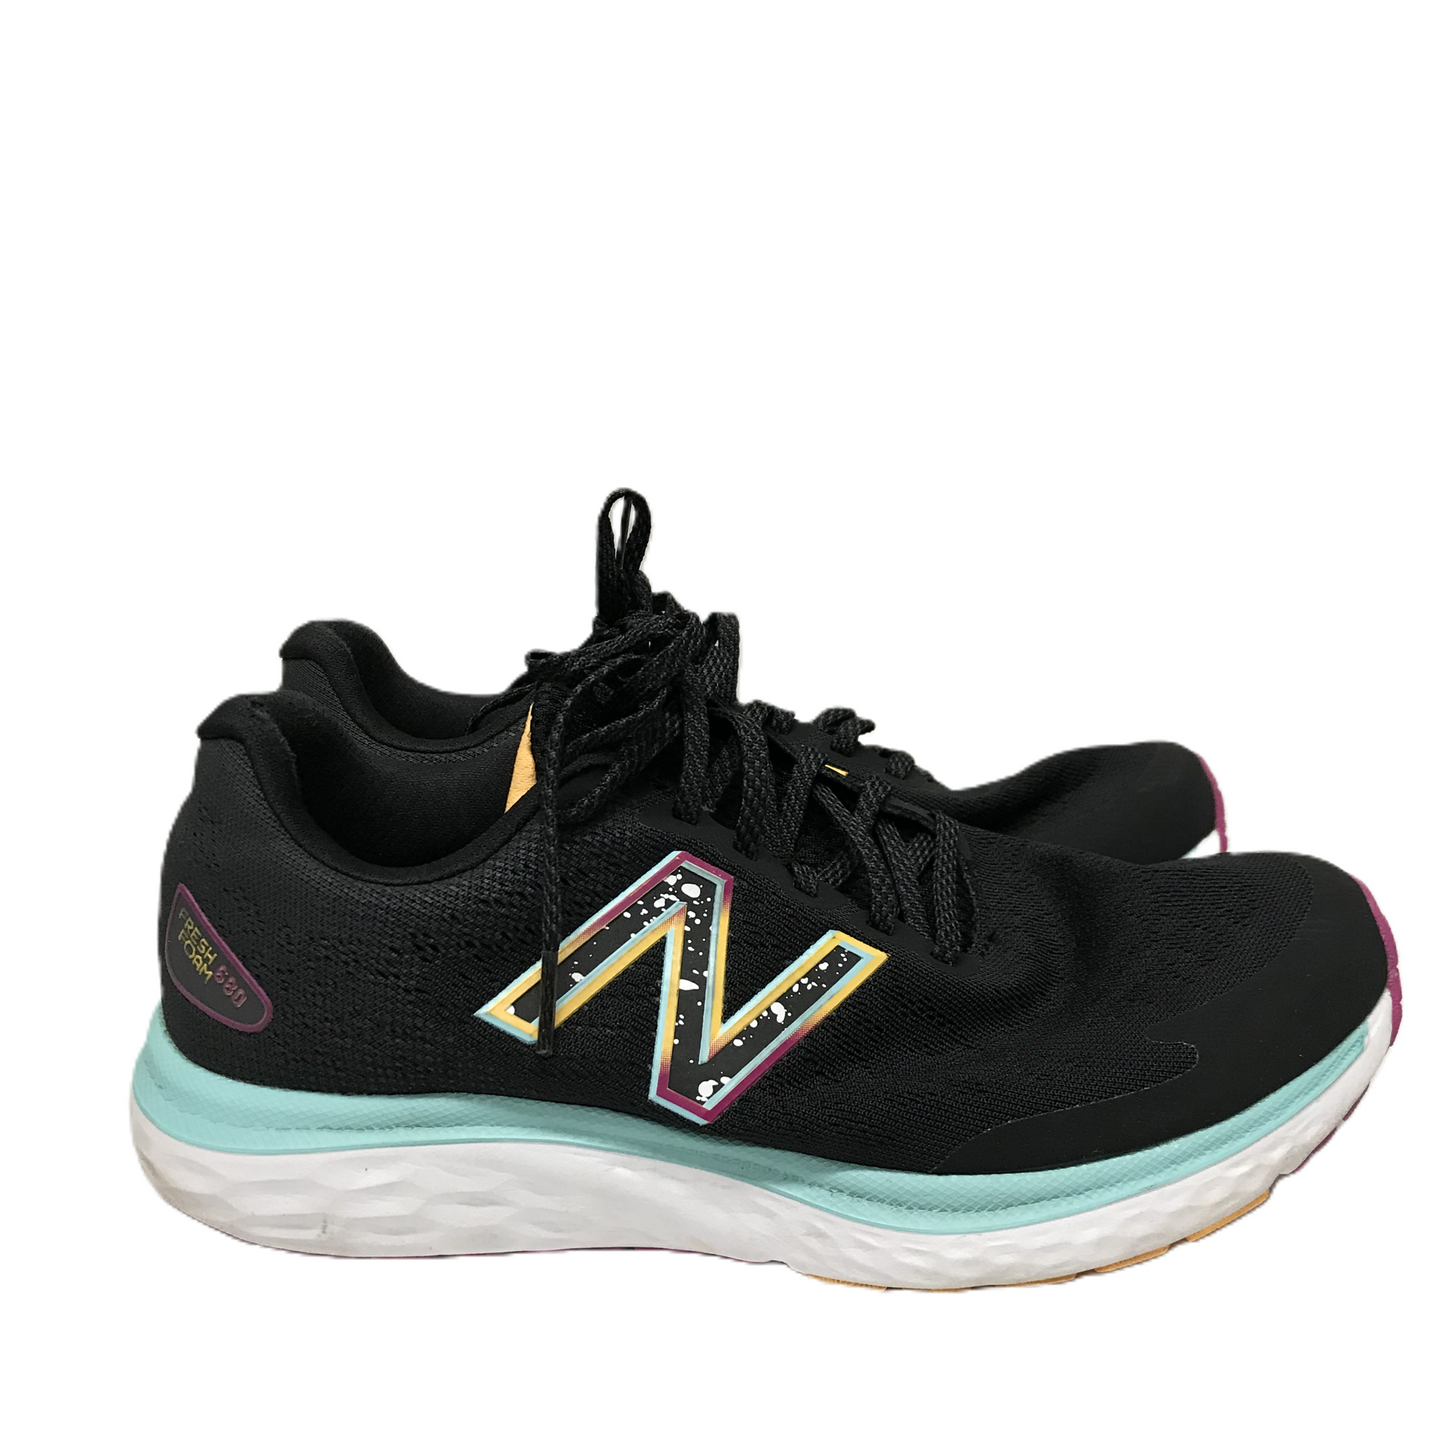 Black Shoes Athletic By New Balance, Size: 9.5